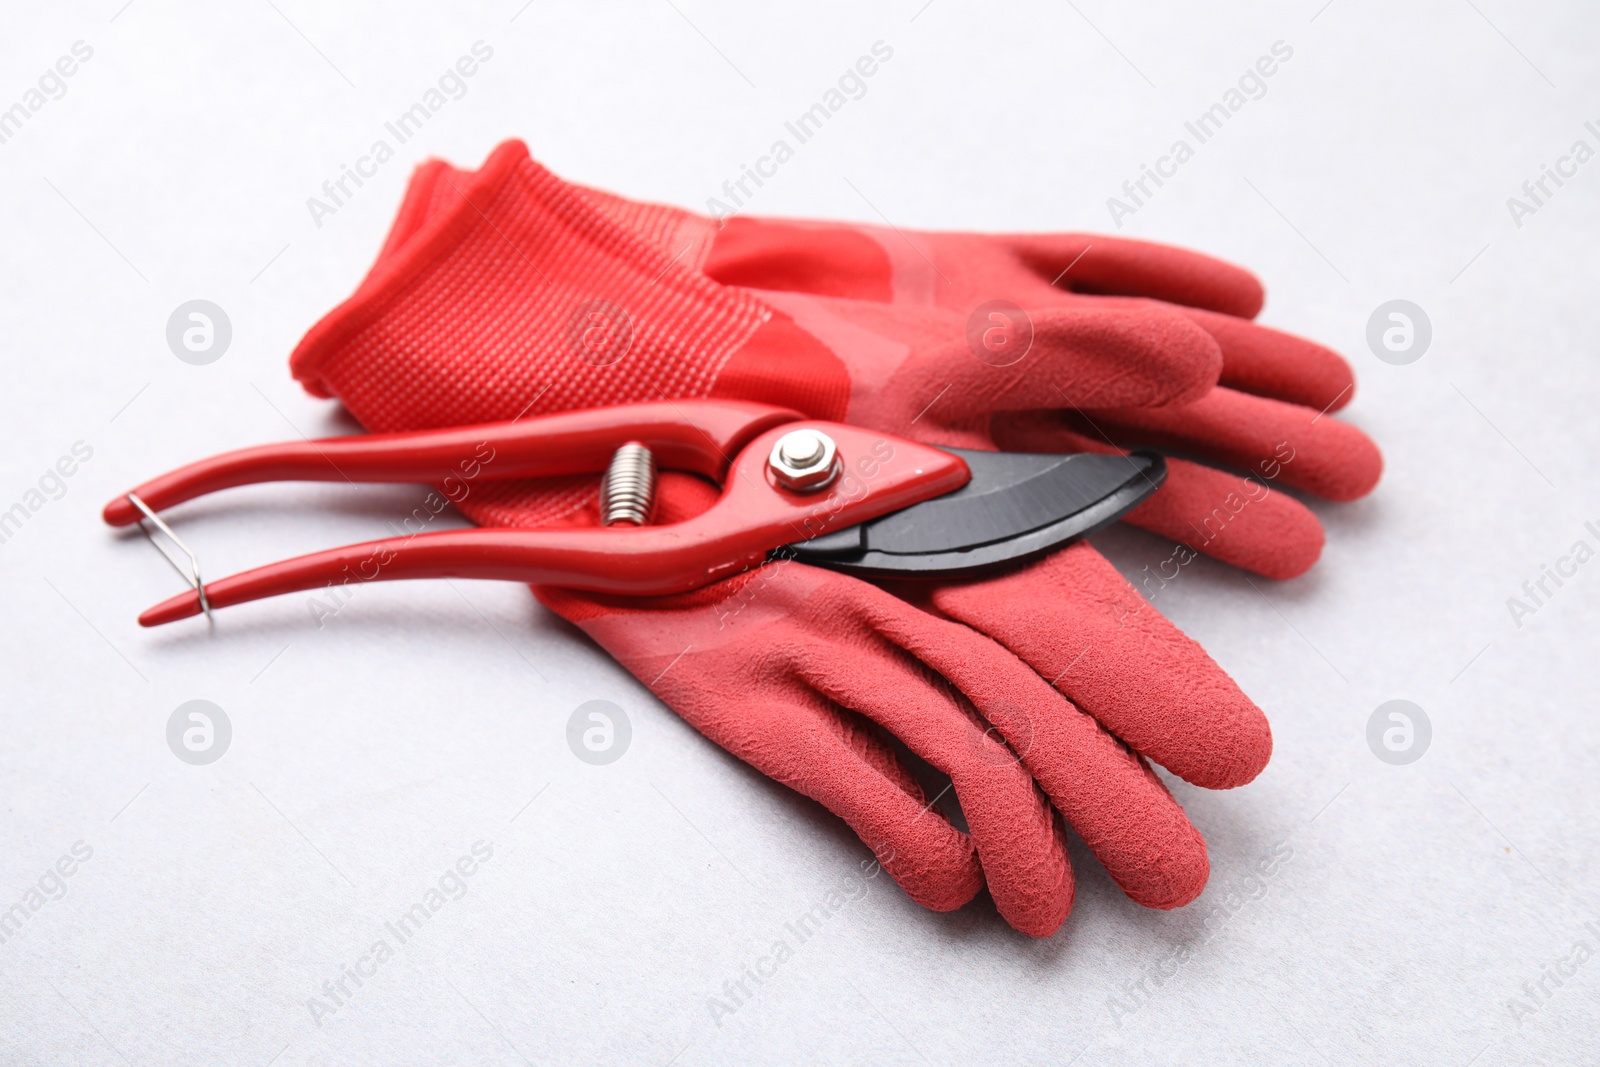 Photo of Pair of red gardening gloves and secateurs on light grey table